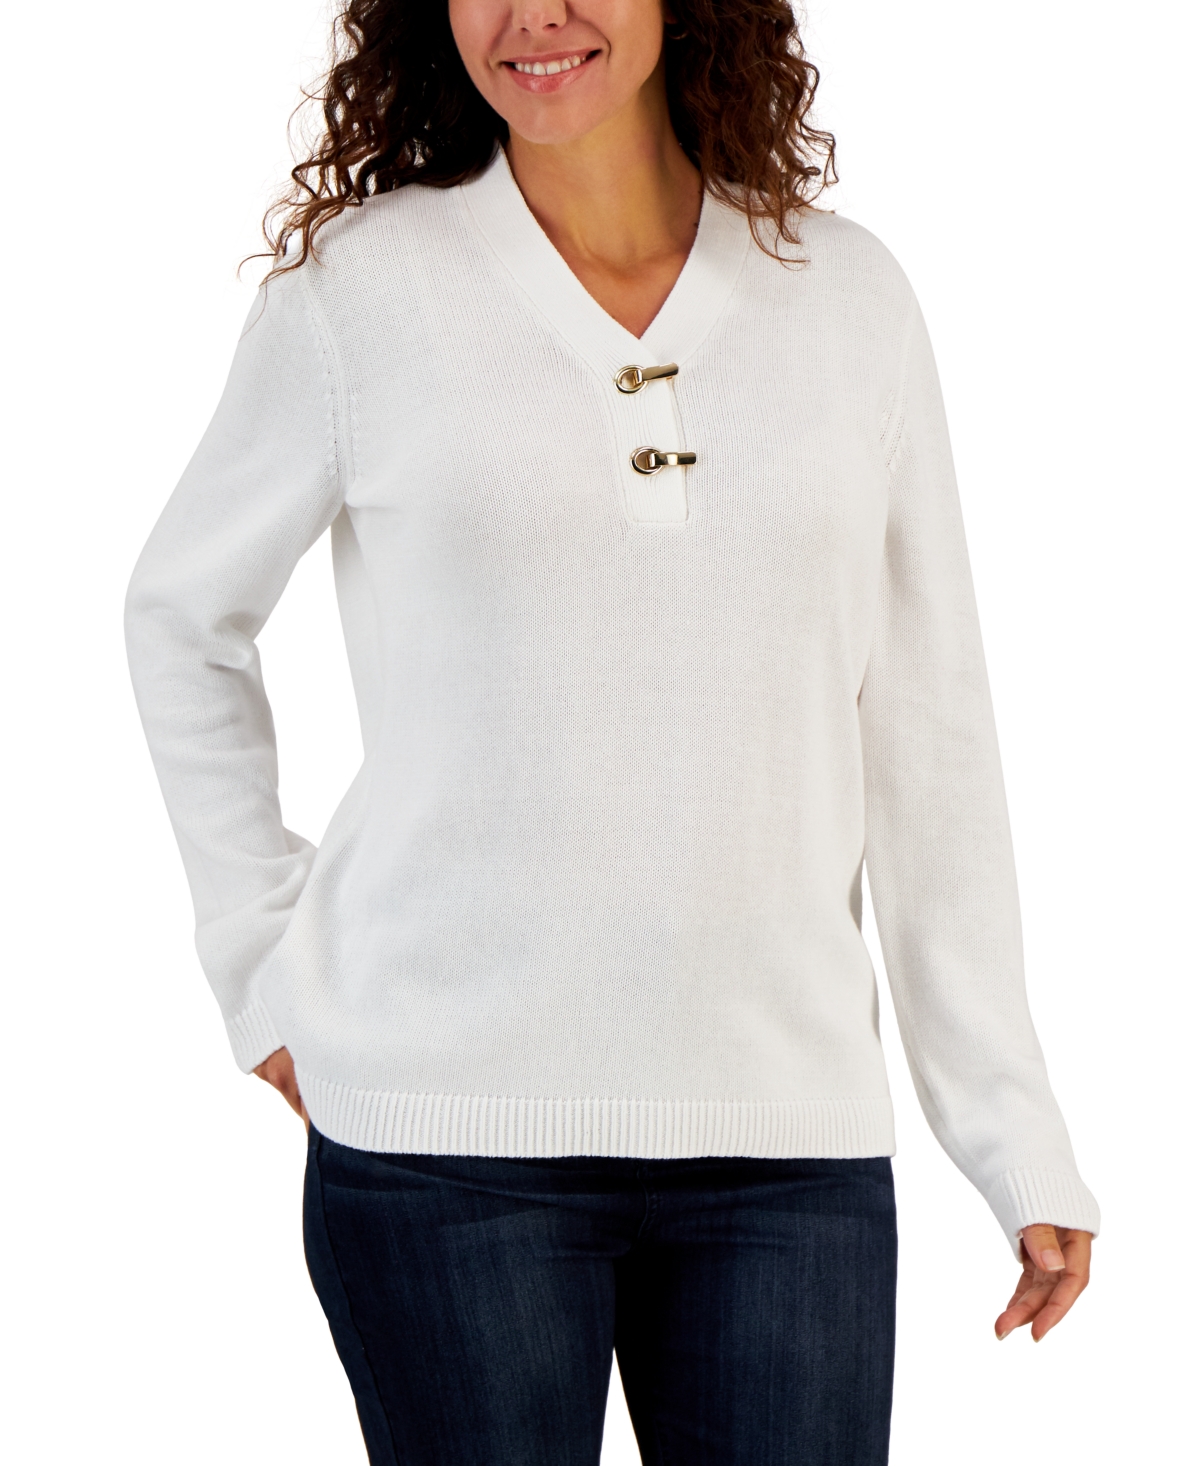 Women's Hardware Cotton Henley Top, Created for Macy's - Winter White